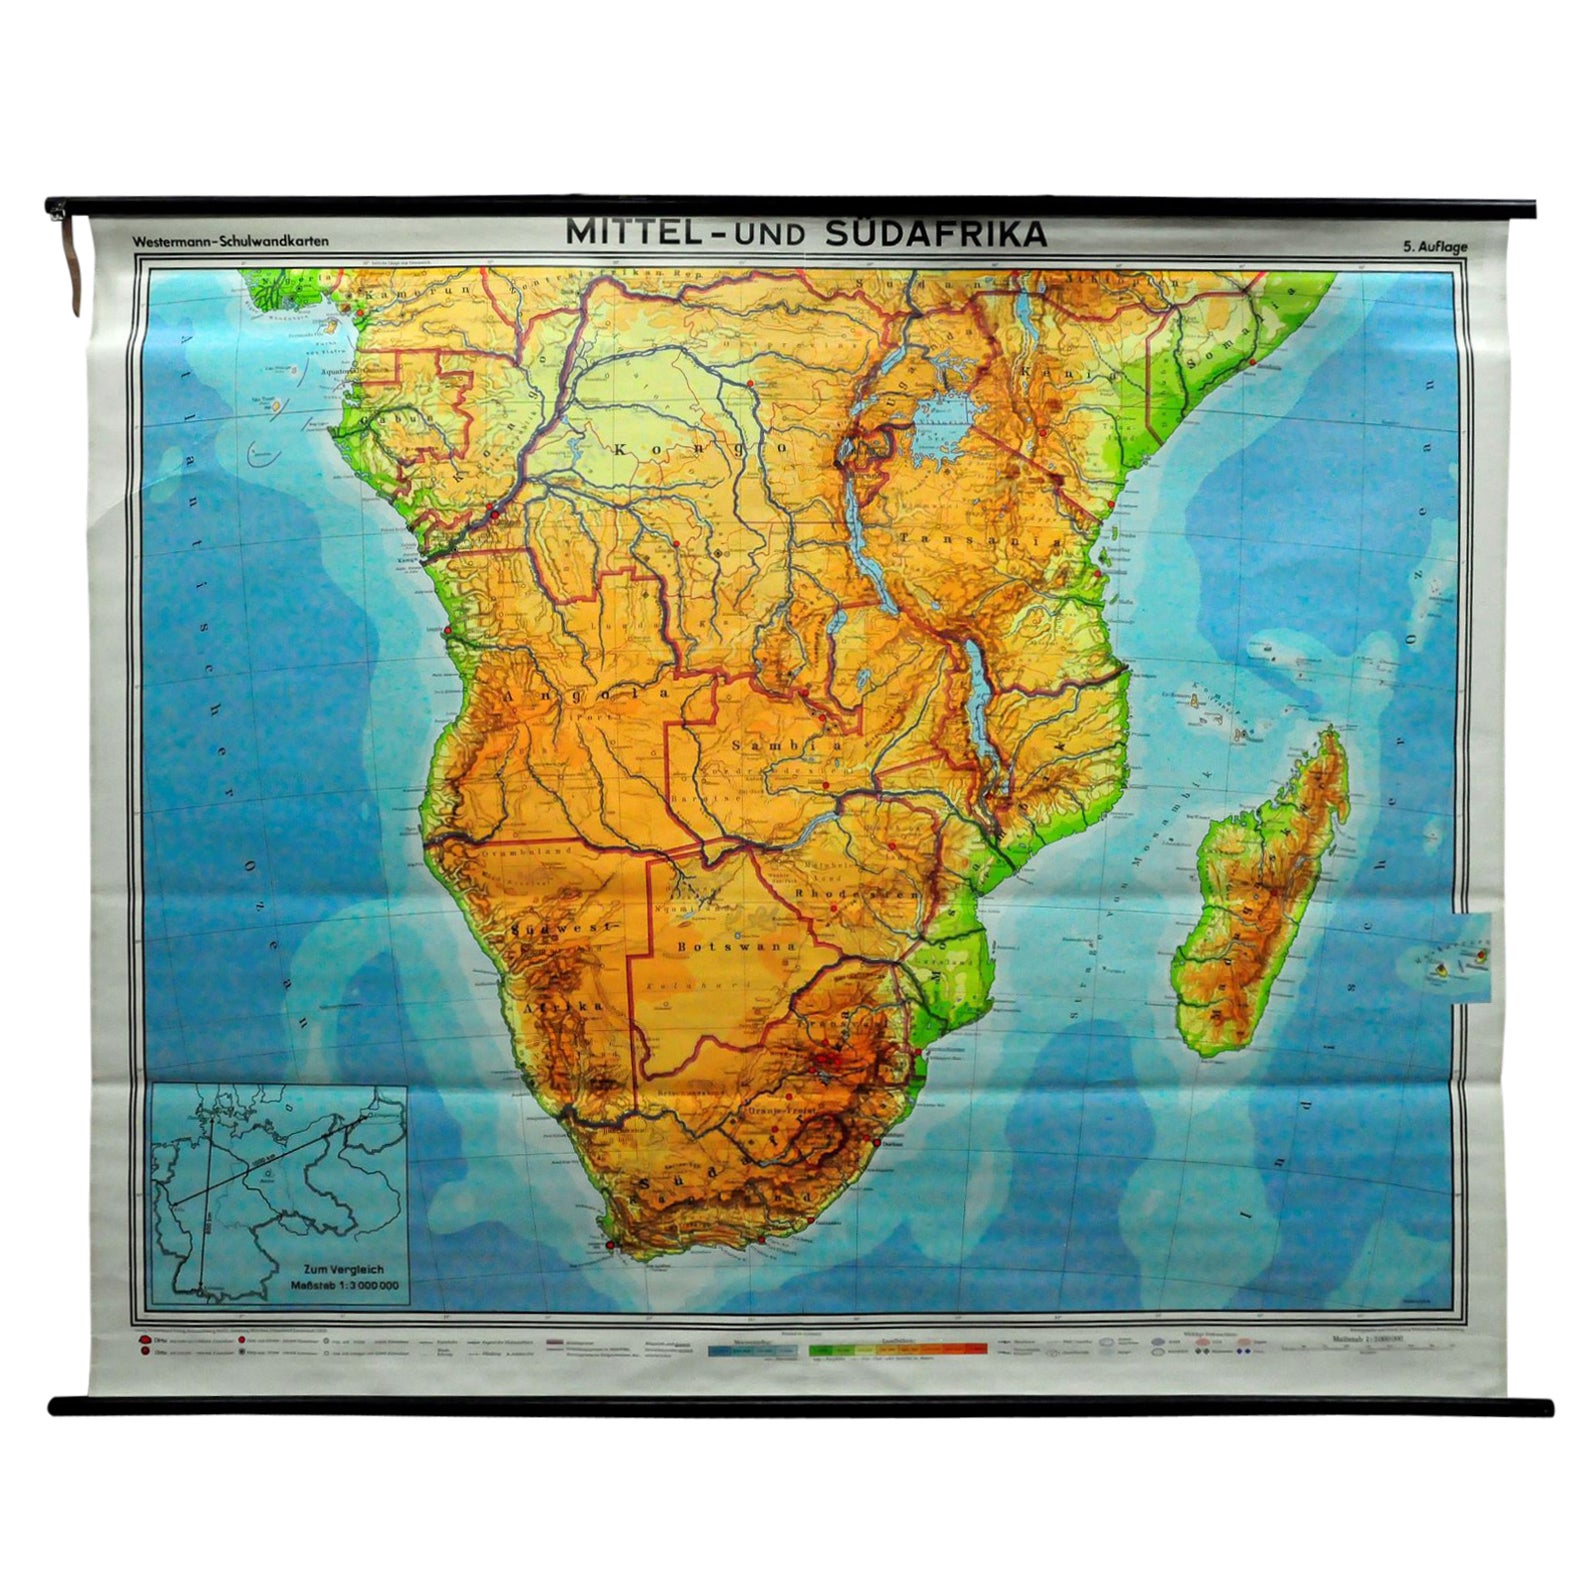 Countrycore Mural Vintage Map Wall Chart Rollable Poster Central South Africa